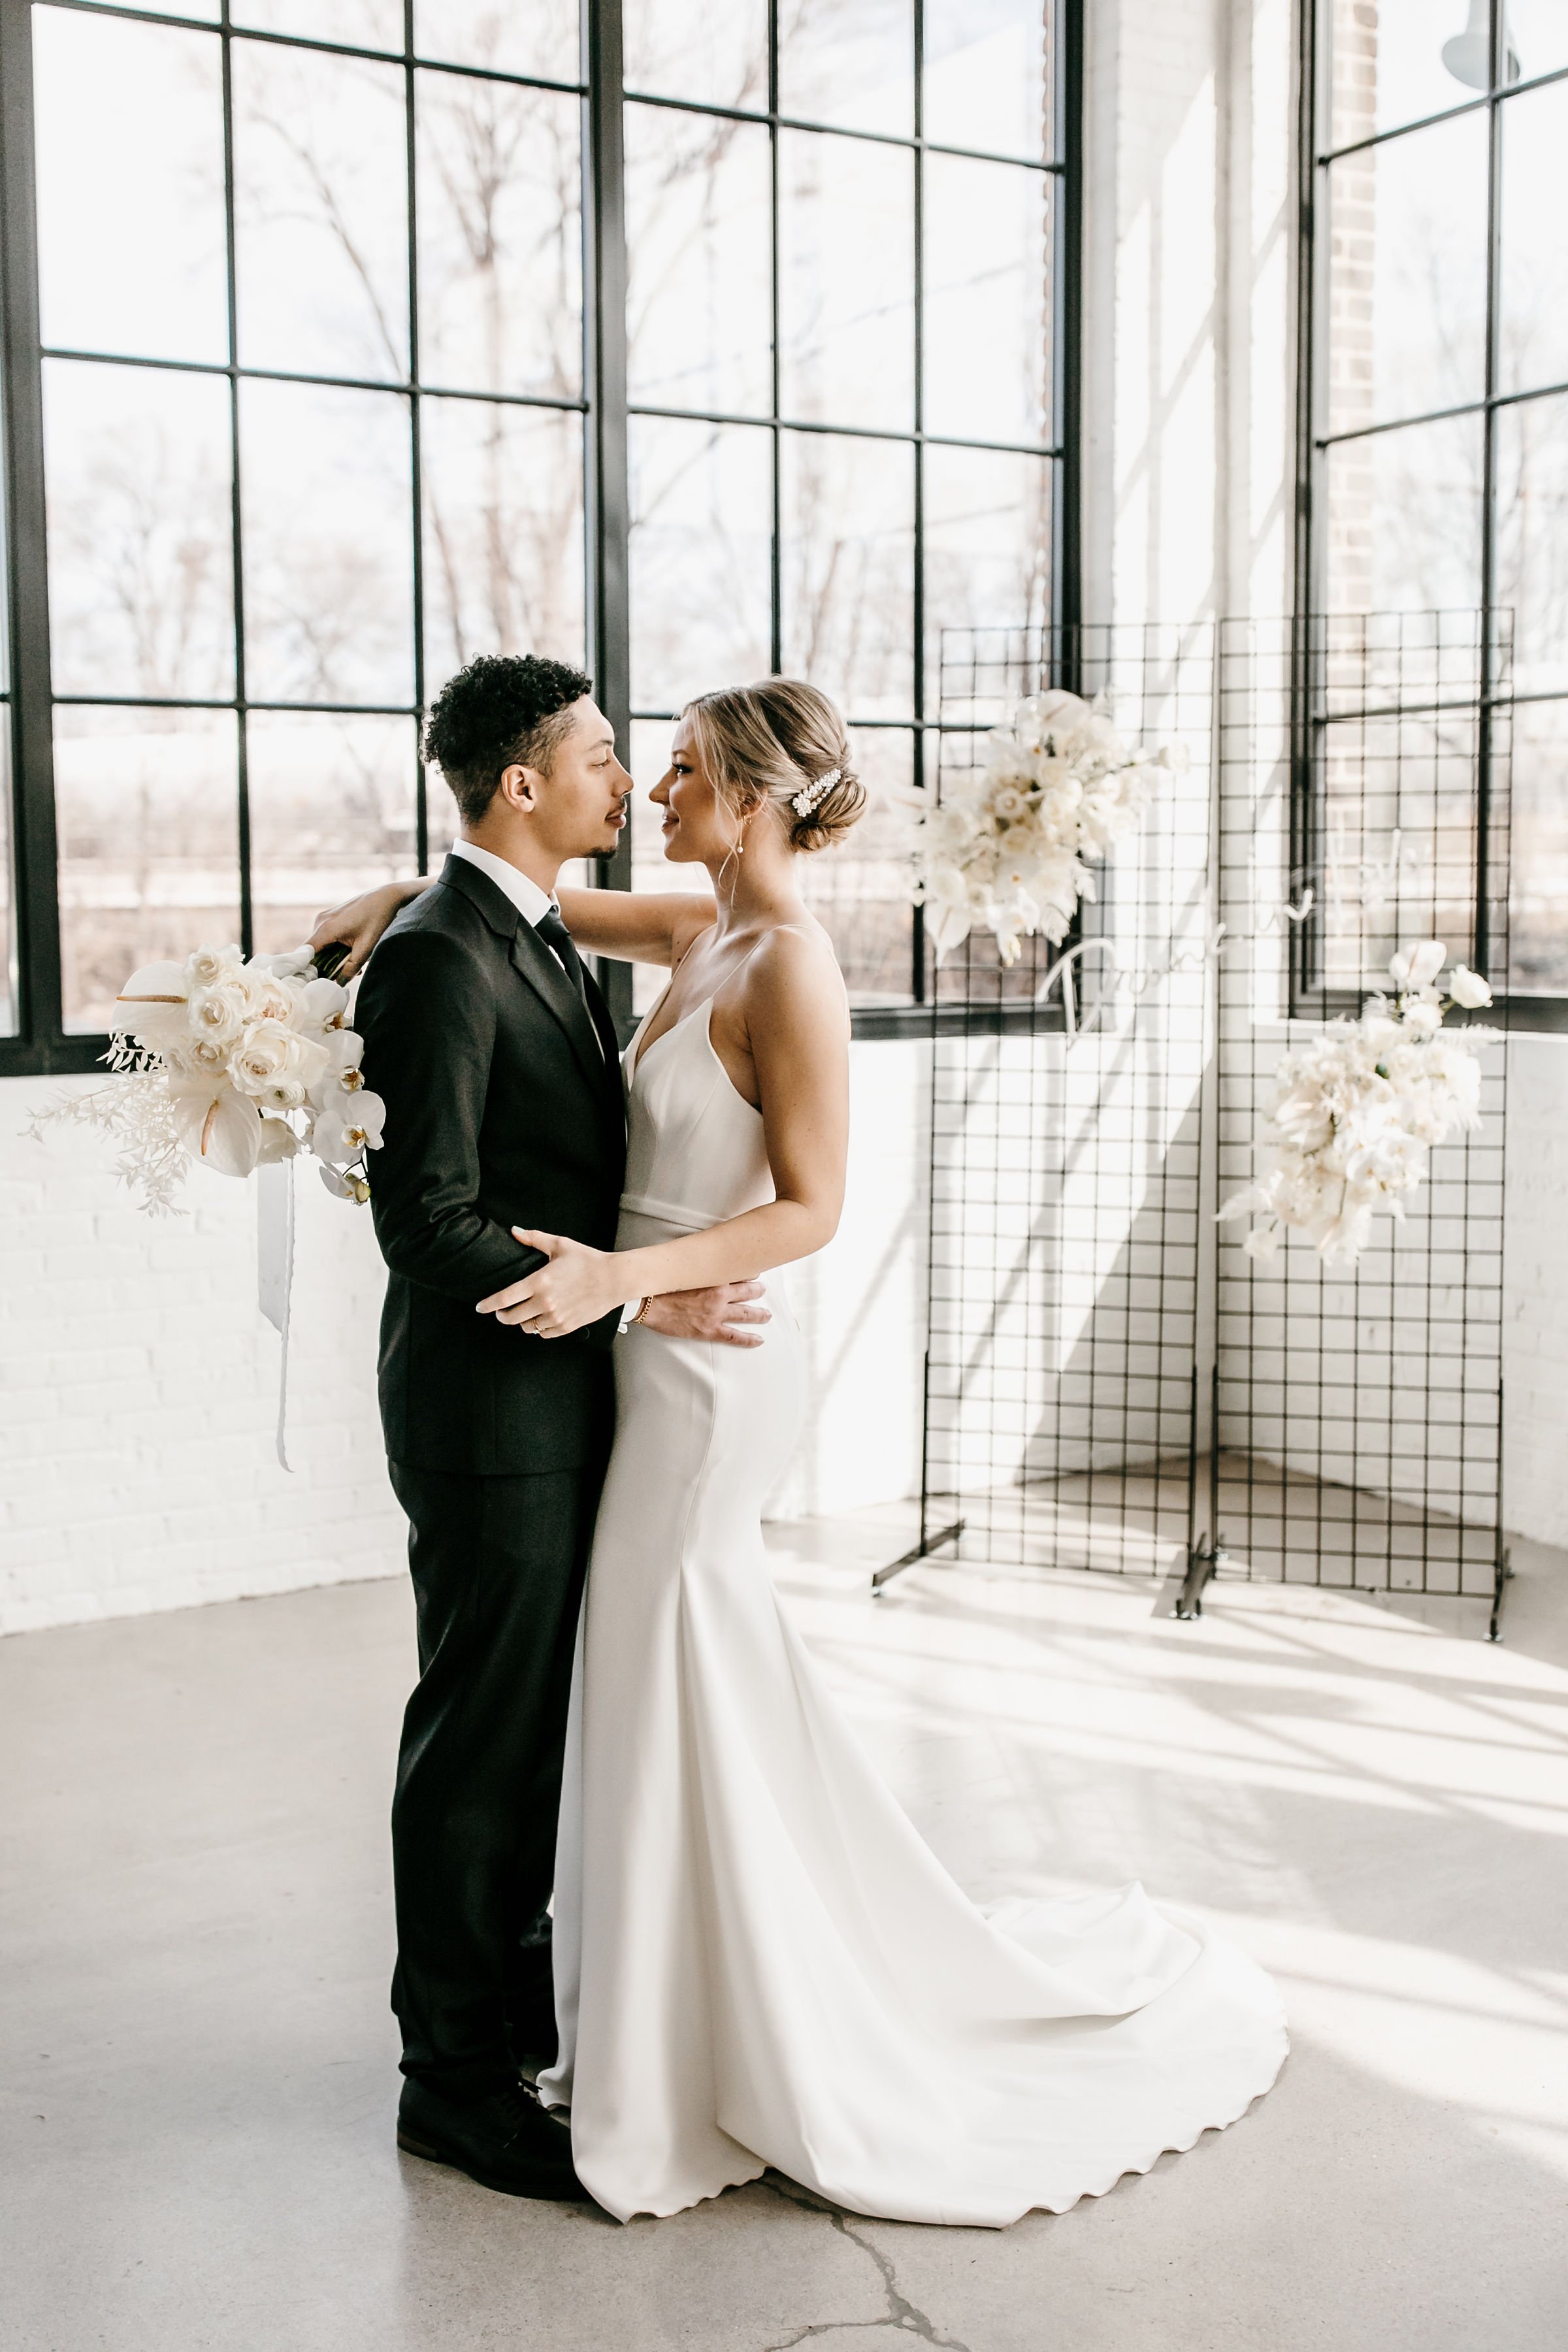 Minimal Styled Wedding With Sophisticated Black And White Color Scheme｜Anna  Bé Bridal Boutique